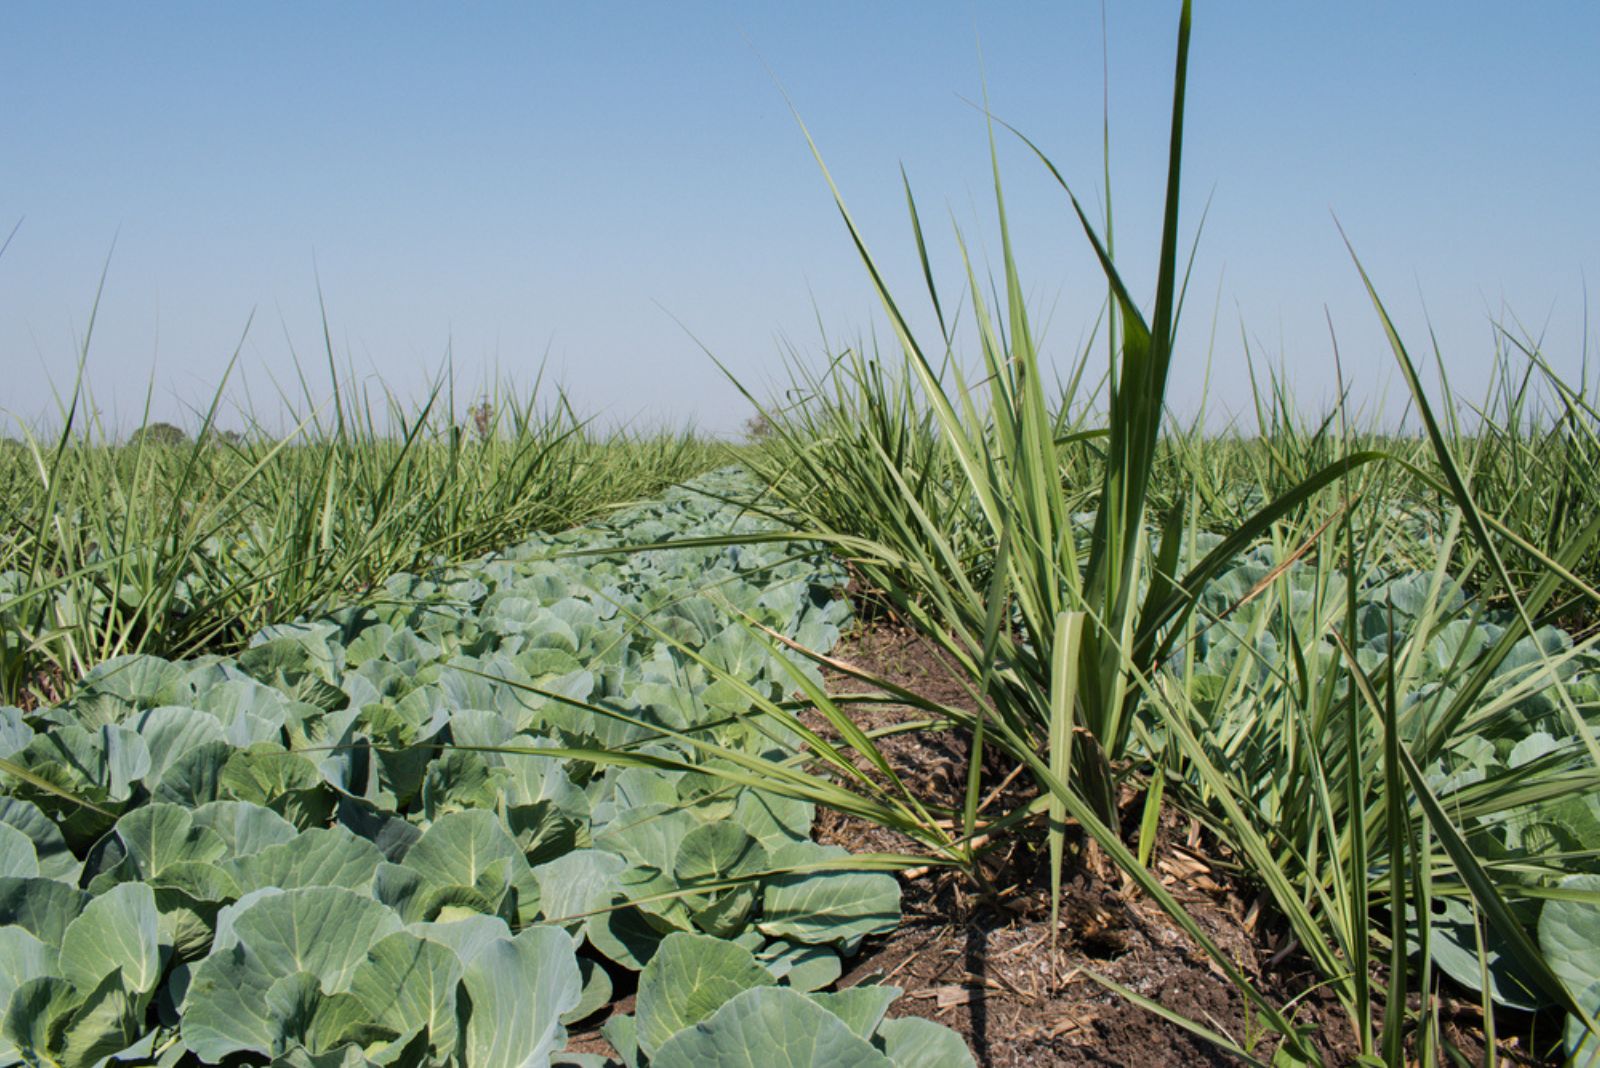 Companion planting of sugarcane and cabbage